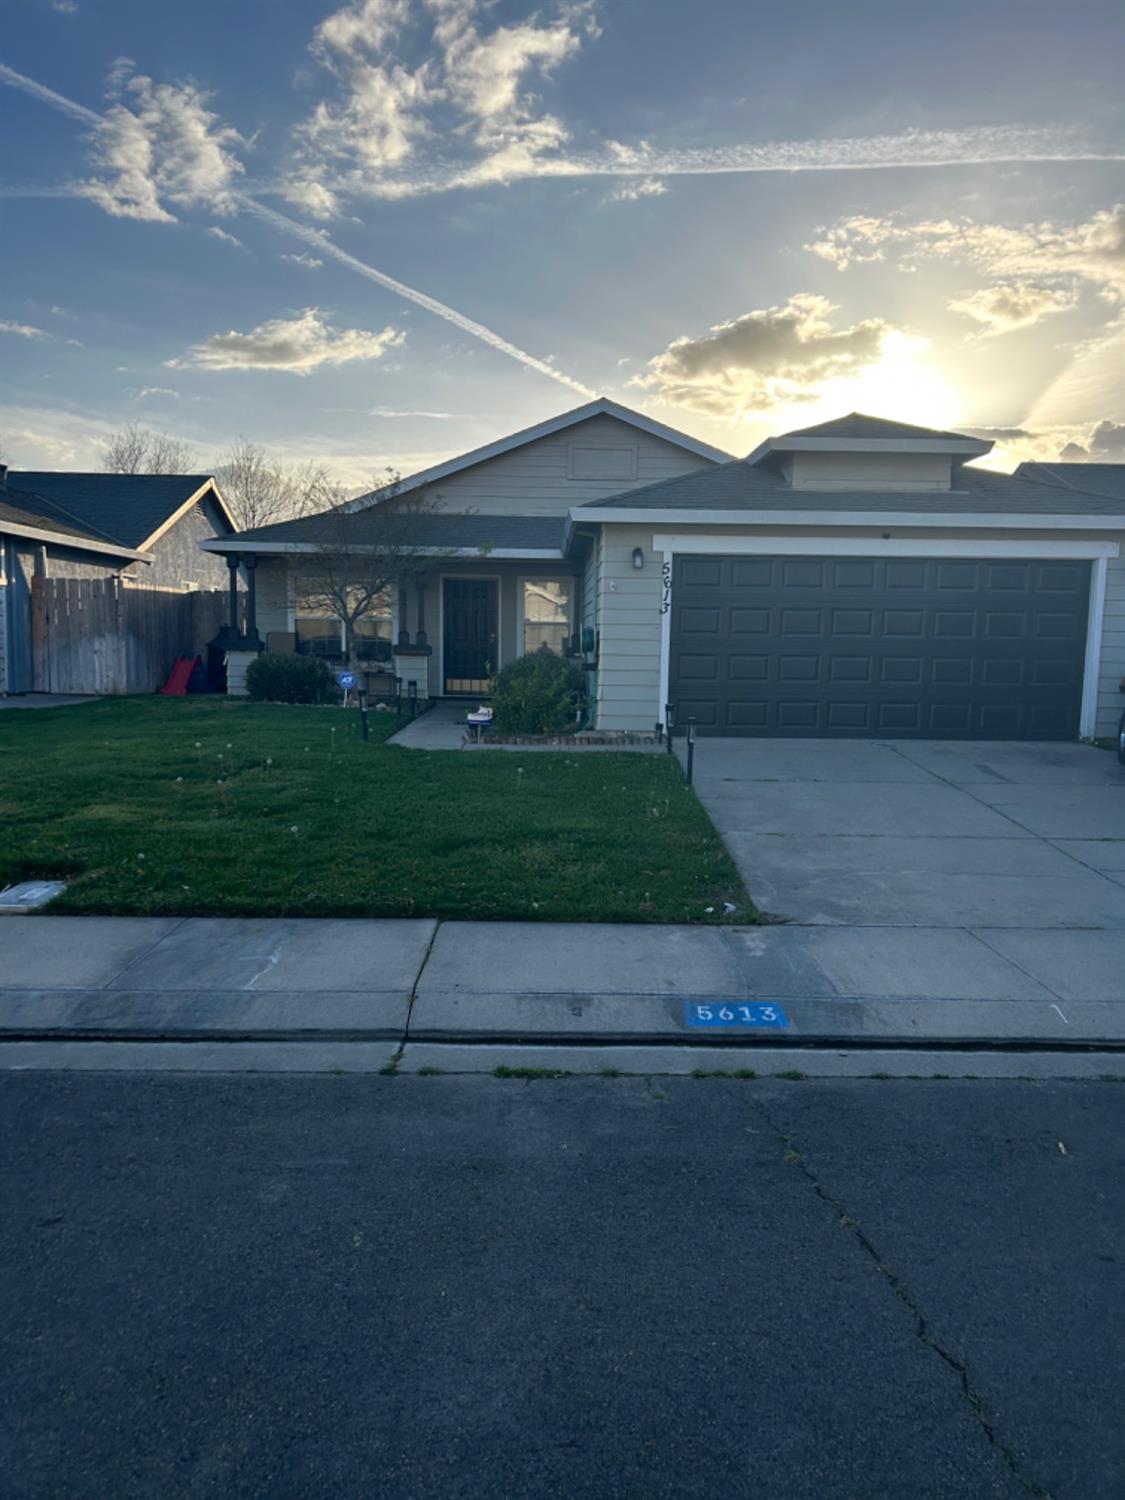 Photo of 5613 Rose Brook Dr in Riverbank, CA